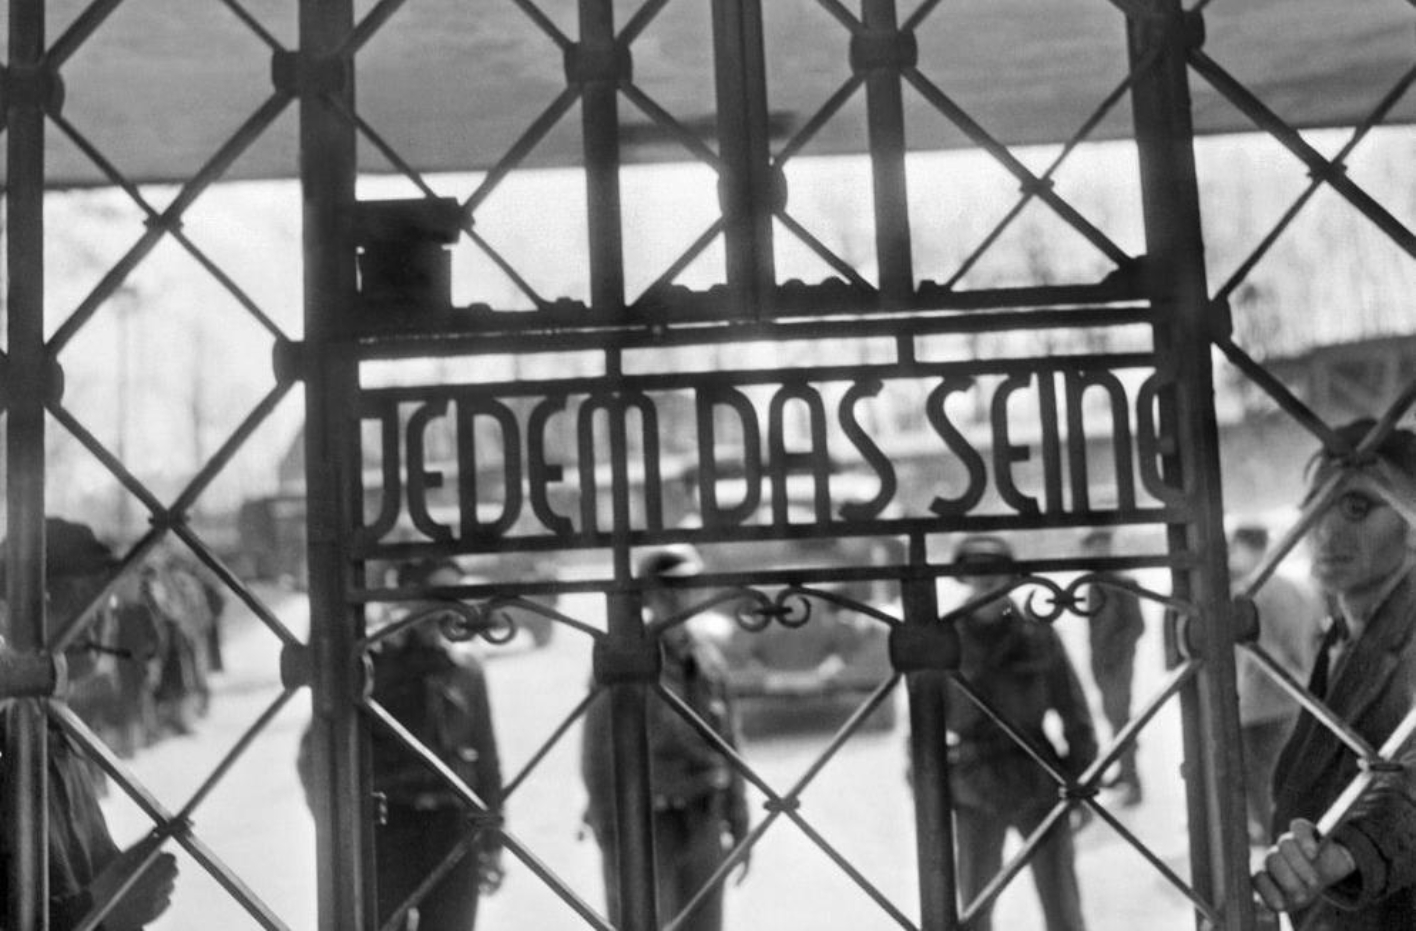 View through the camp gate at the inscription "To each his own". Behind the gate American soldiers and former prisoners.